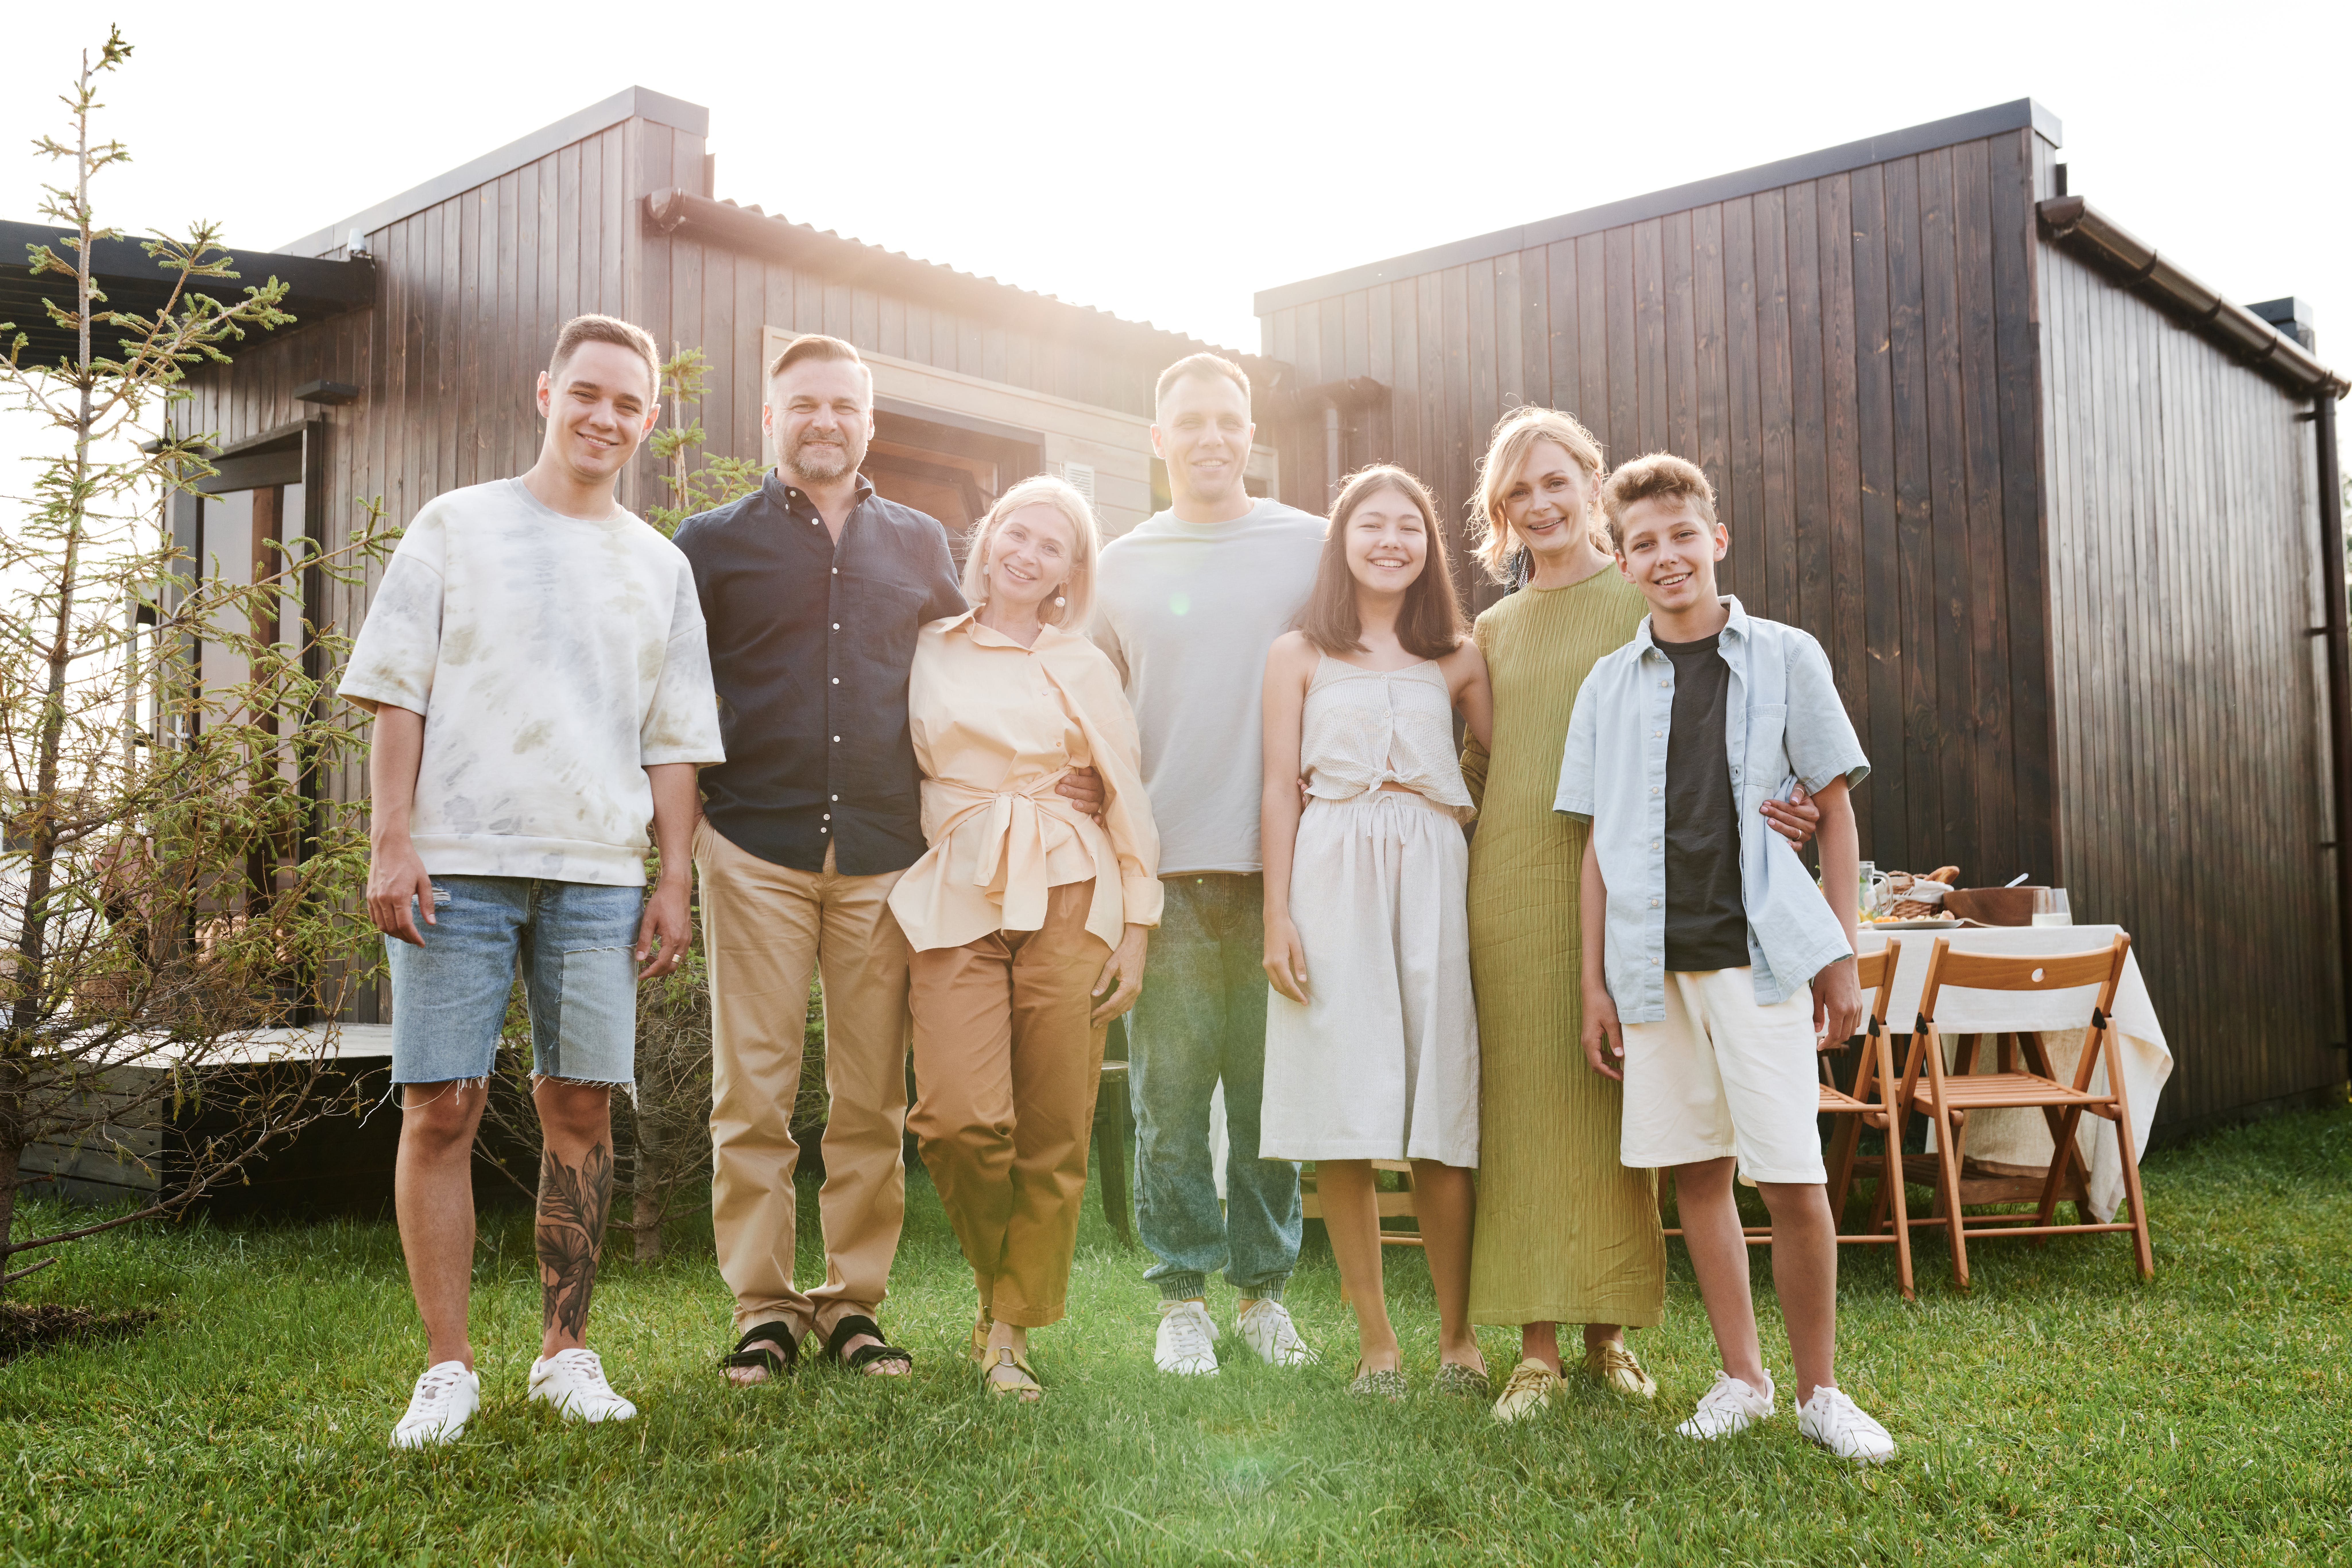 A family picture | Source: Pexels